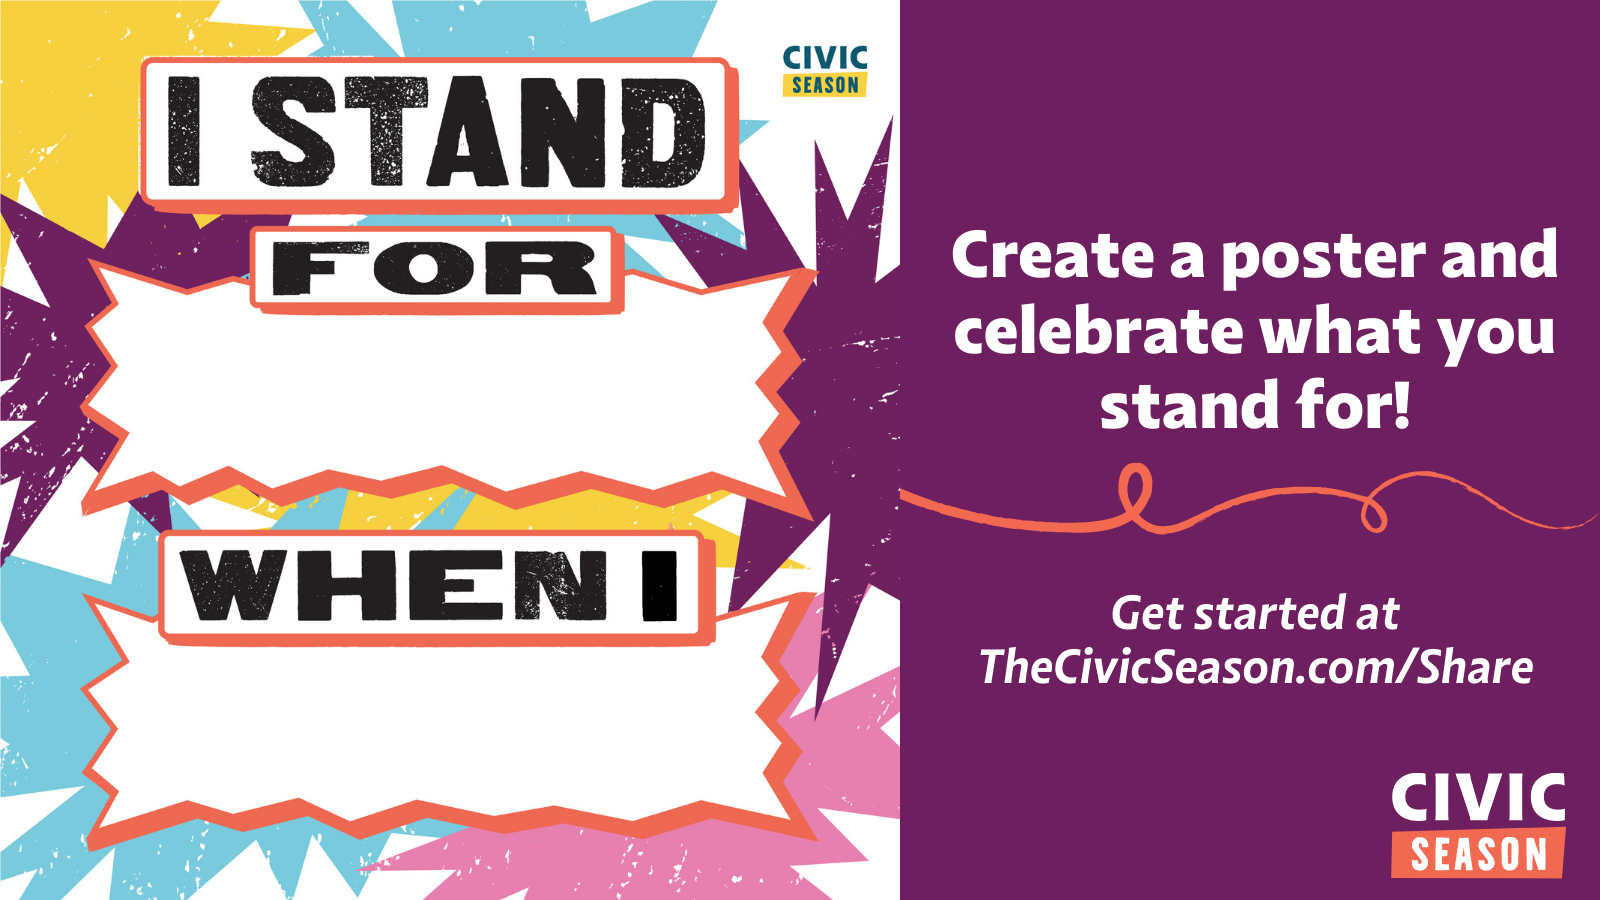 Share What You Stand For with the iconic Civic Season Poster-Generator